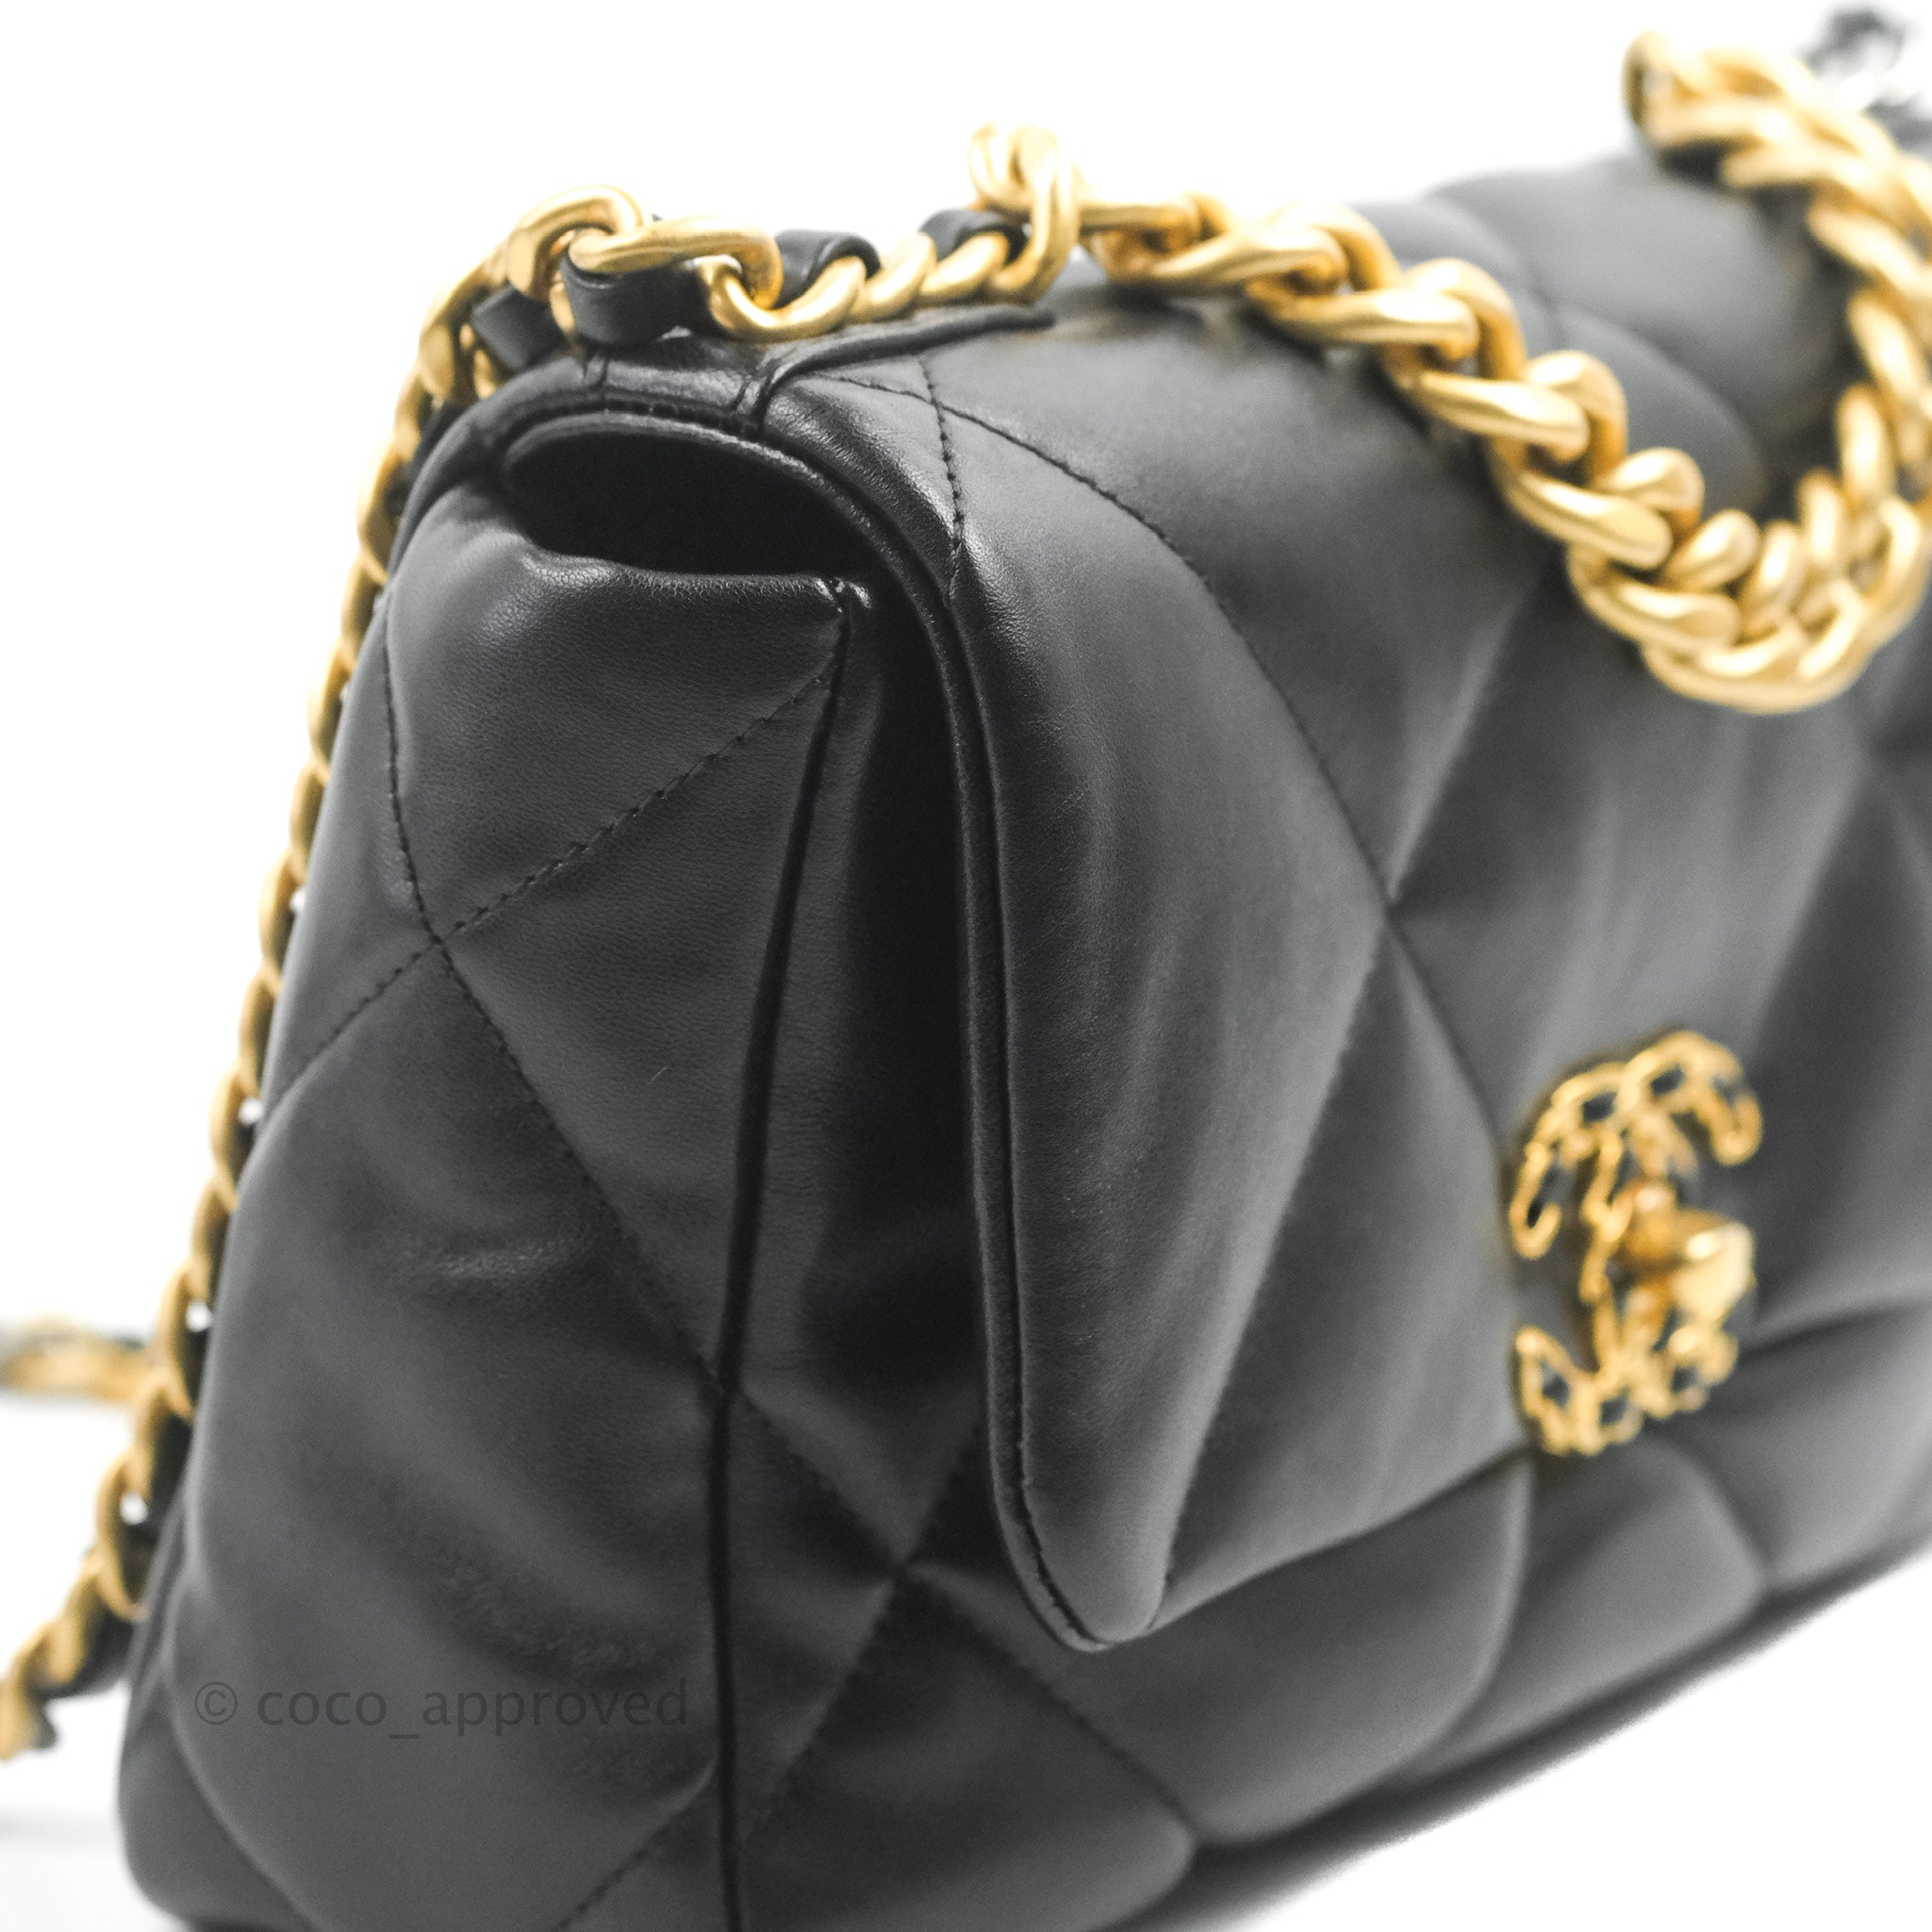 CHANEL Small 19 Black Goatskin Flap Bag Mixed Hardware – AYAINLOVE CURATED  LUXURIES